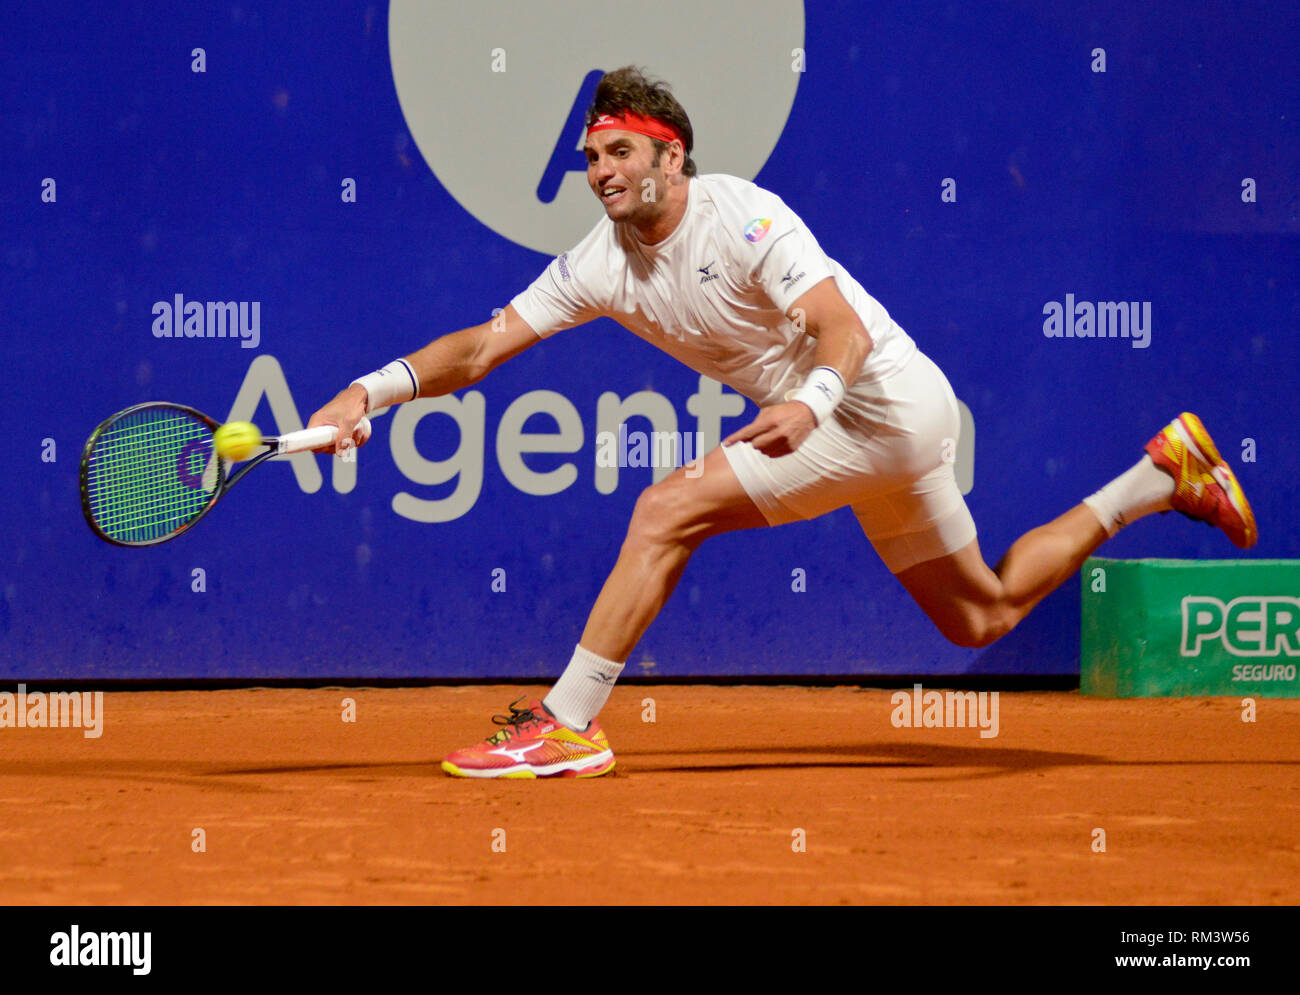 Buenos Aires, Argentina. 12th Feb 2019. Malek Jaziri (Tunisia) lost against David Ferrer (Spain) in the Argentina Open, an ATP 250 tennis tournament Credit: Mariano Garcia/Alamy Live News Stock Photo